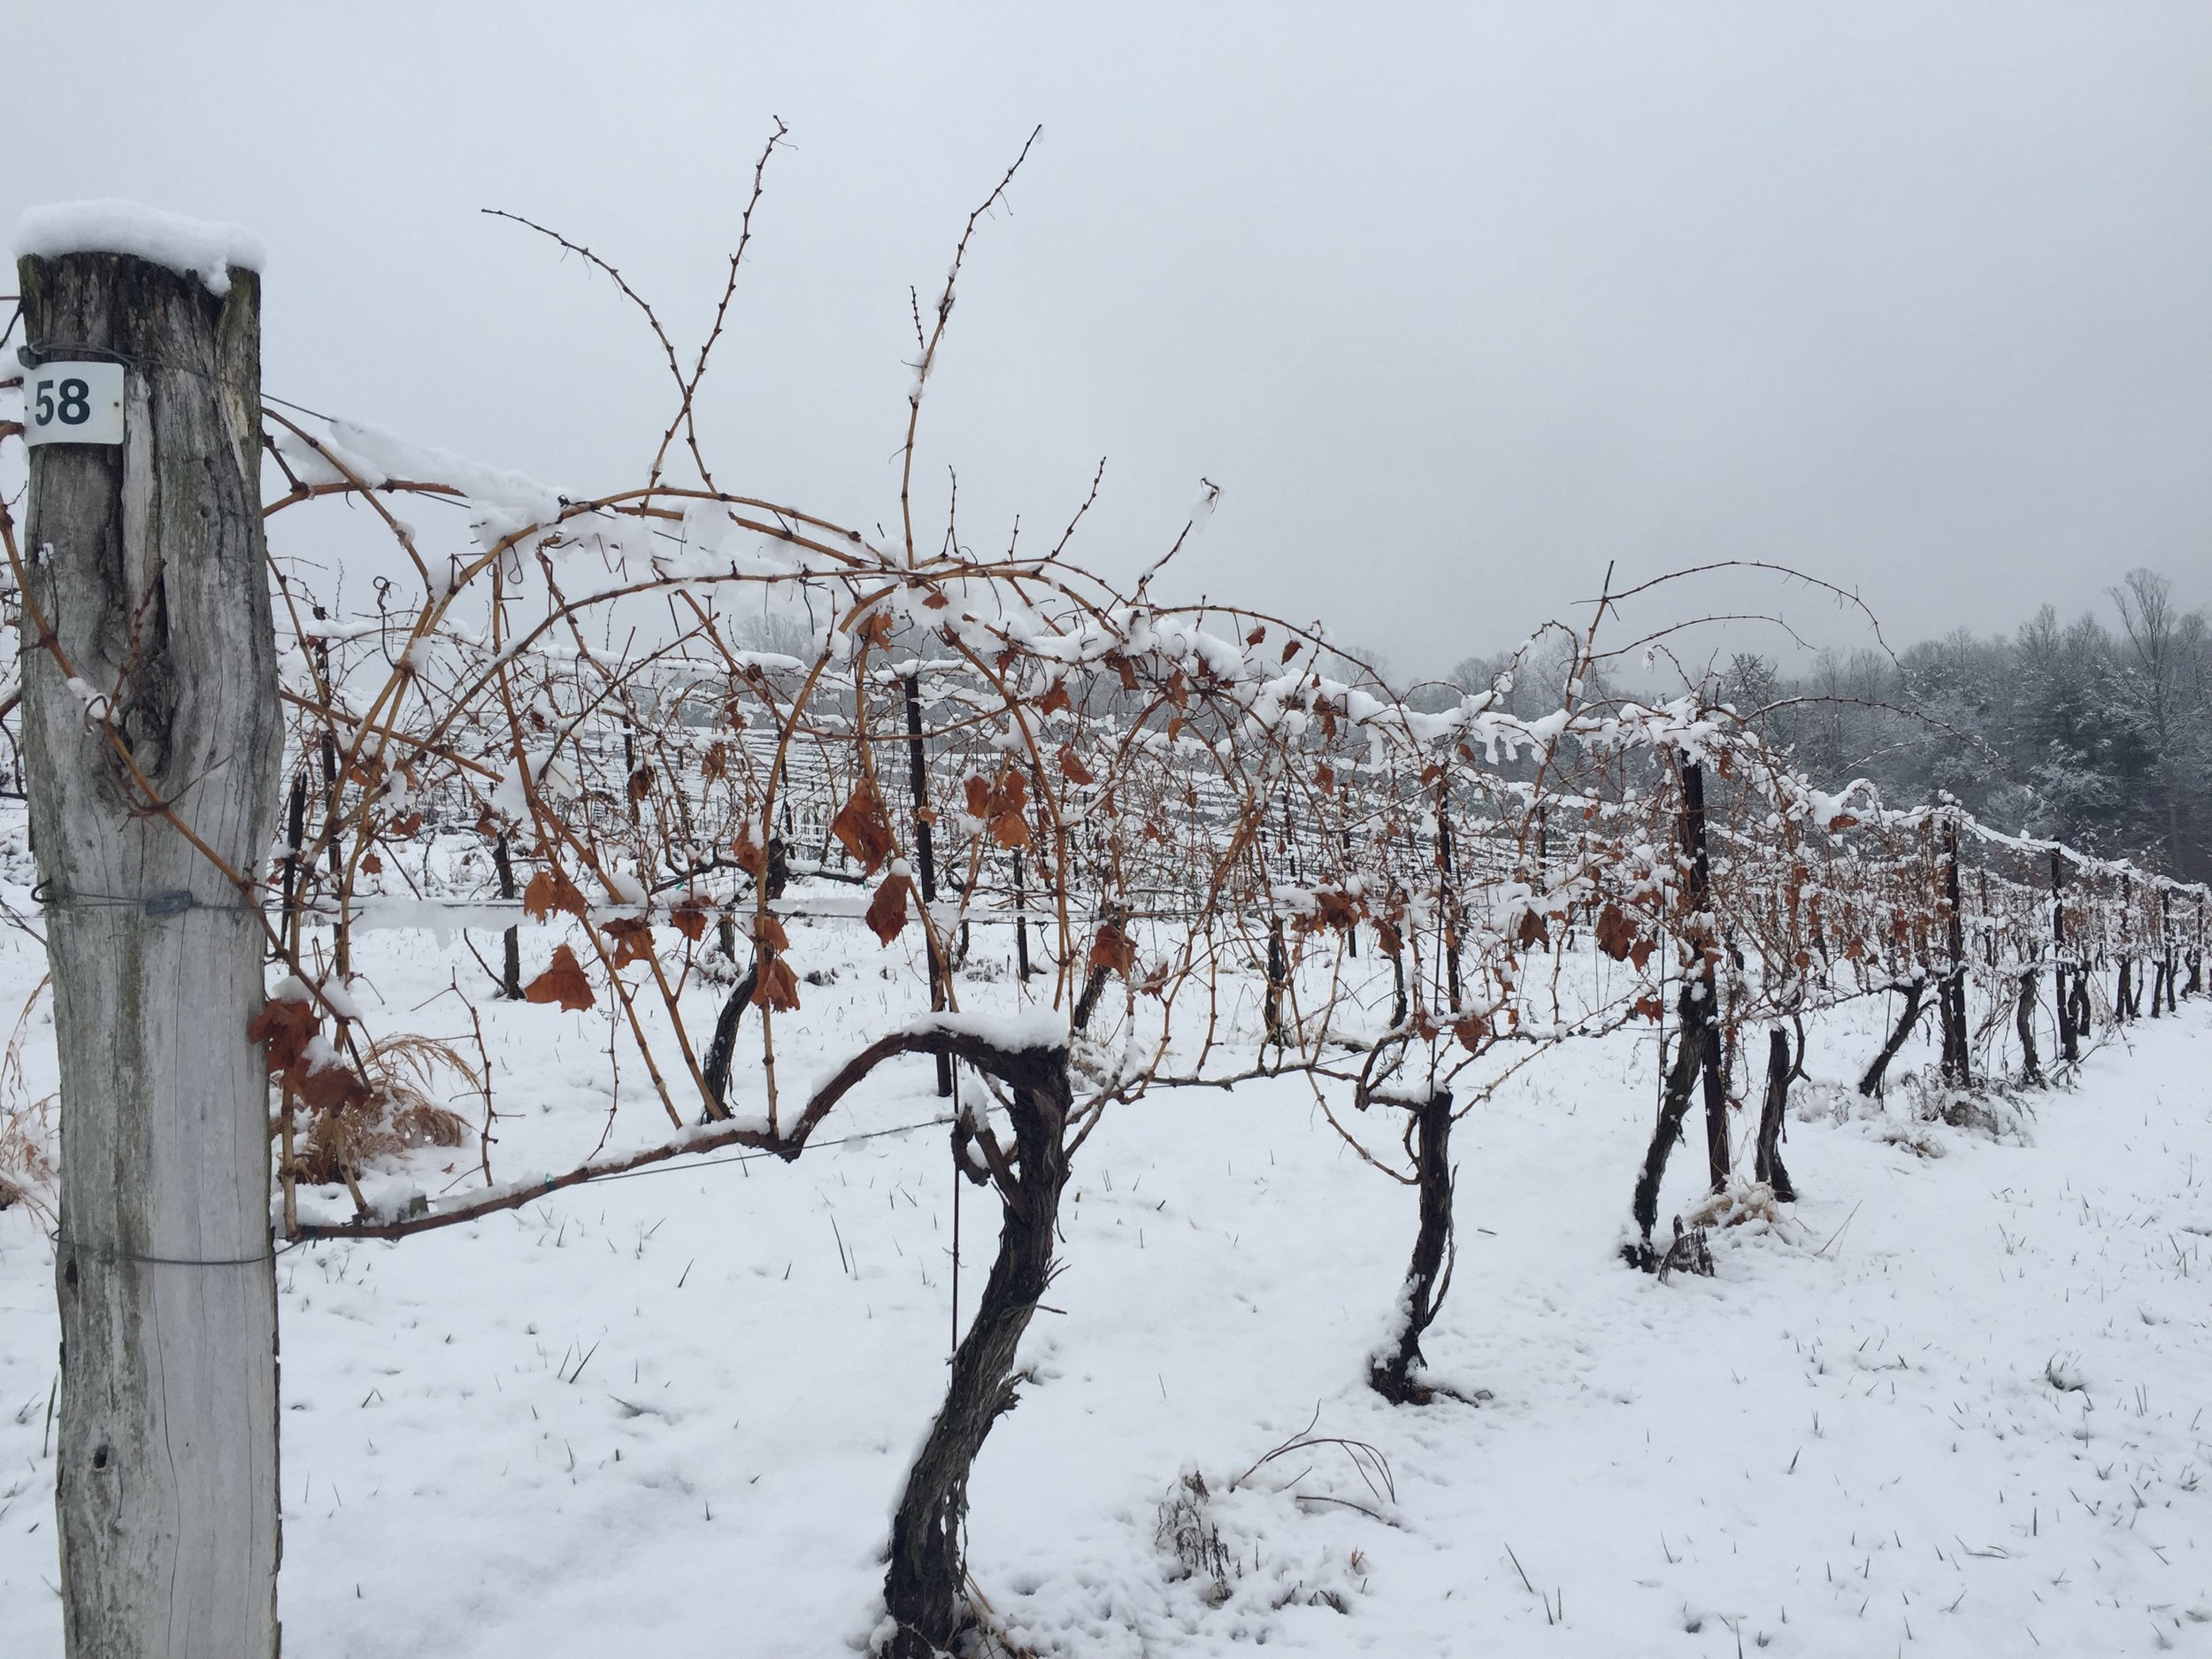 Vines in the snow